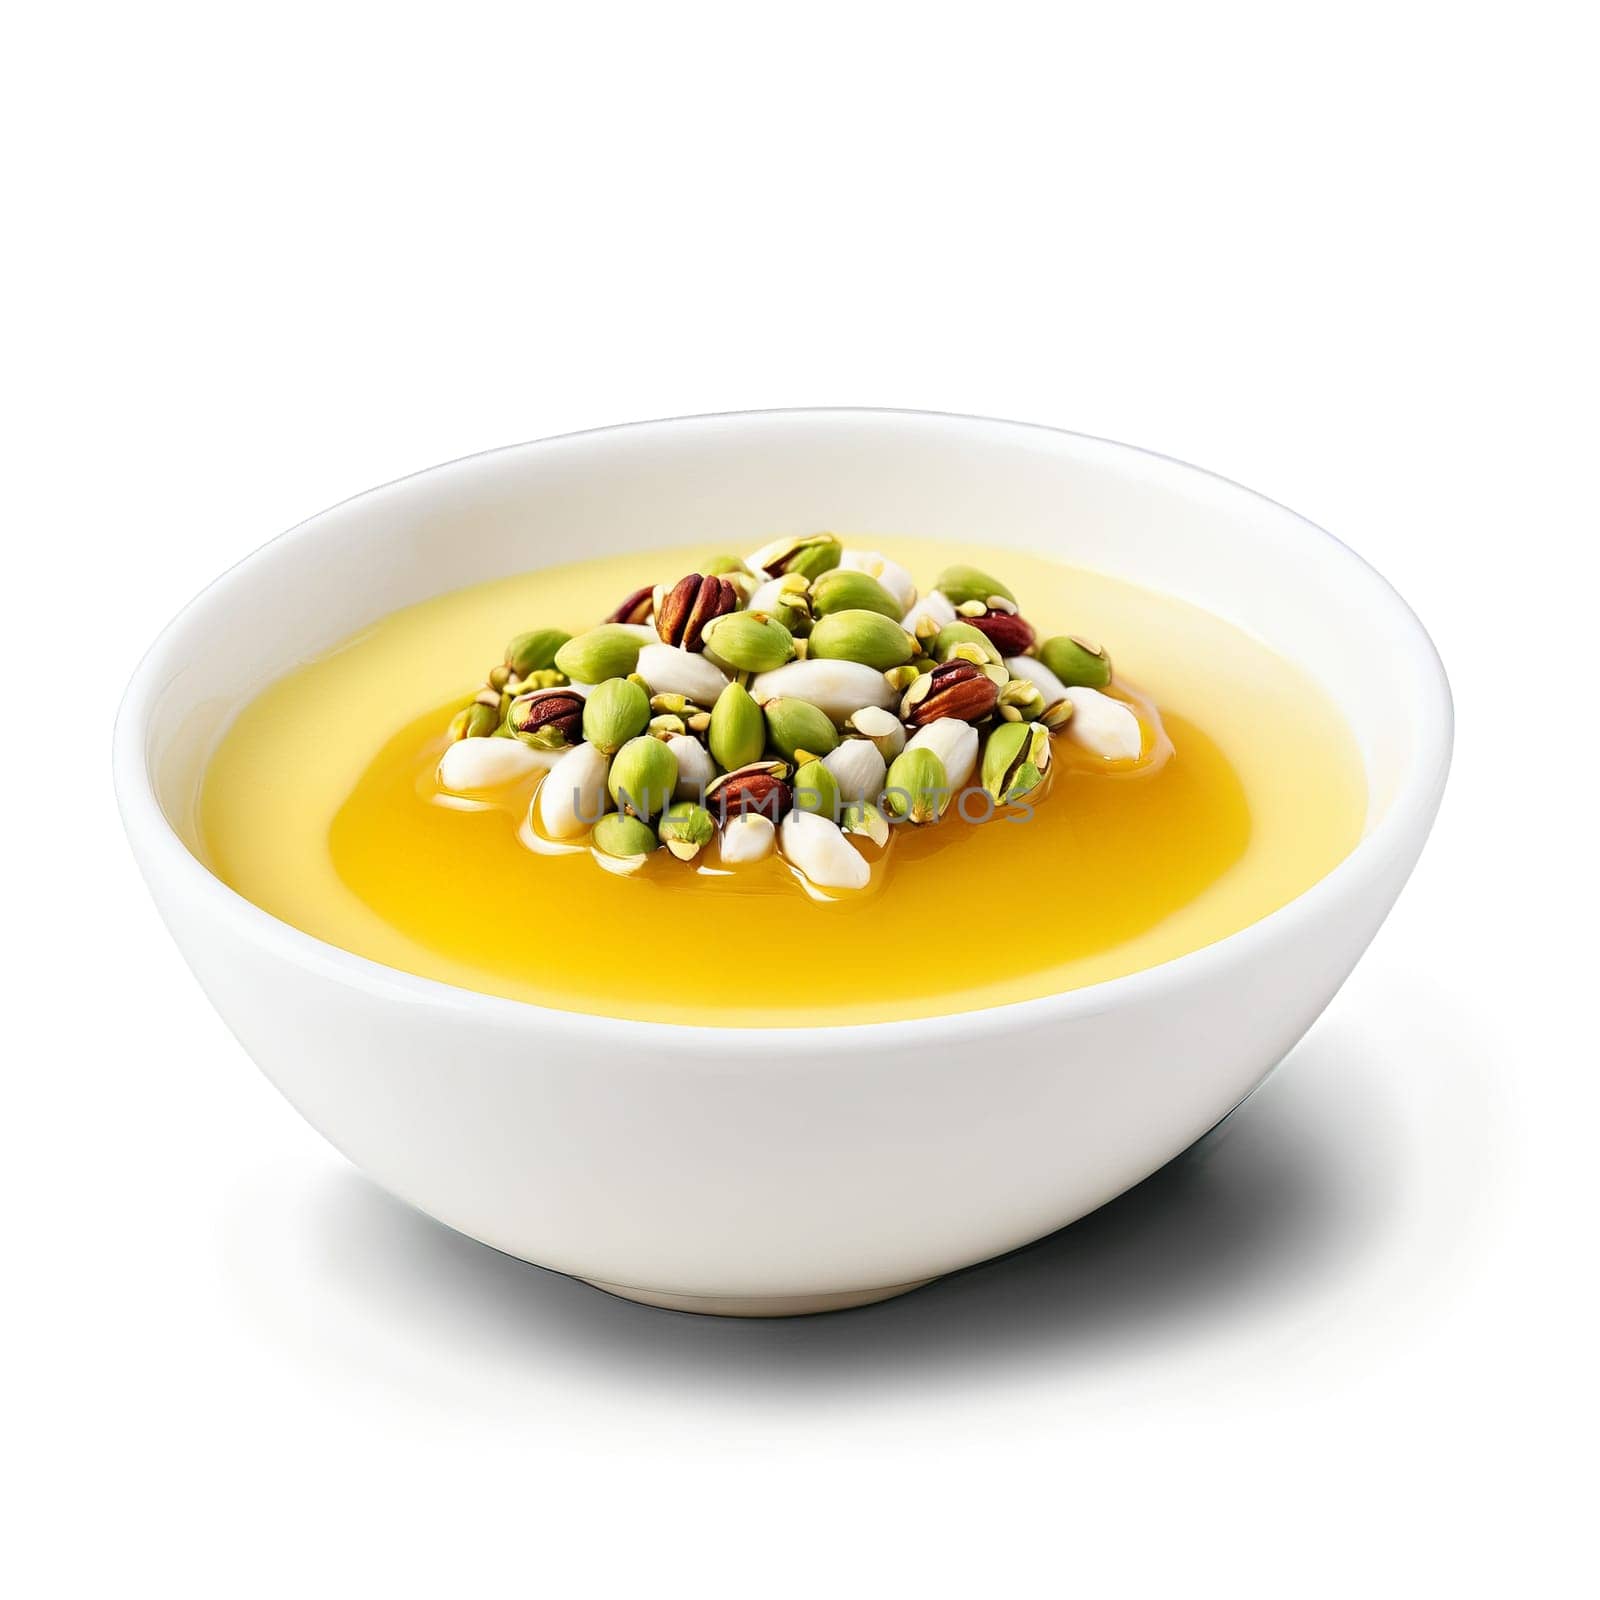 Kaymak in a small ceramic bowl drizzled with wildflower honey and sprinkled with chopped pistachios by panophotograph